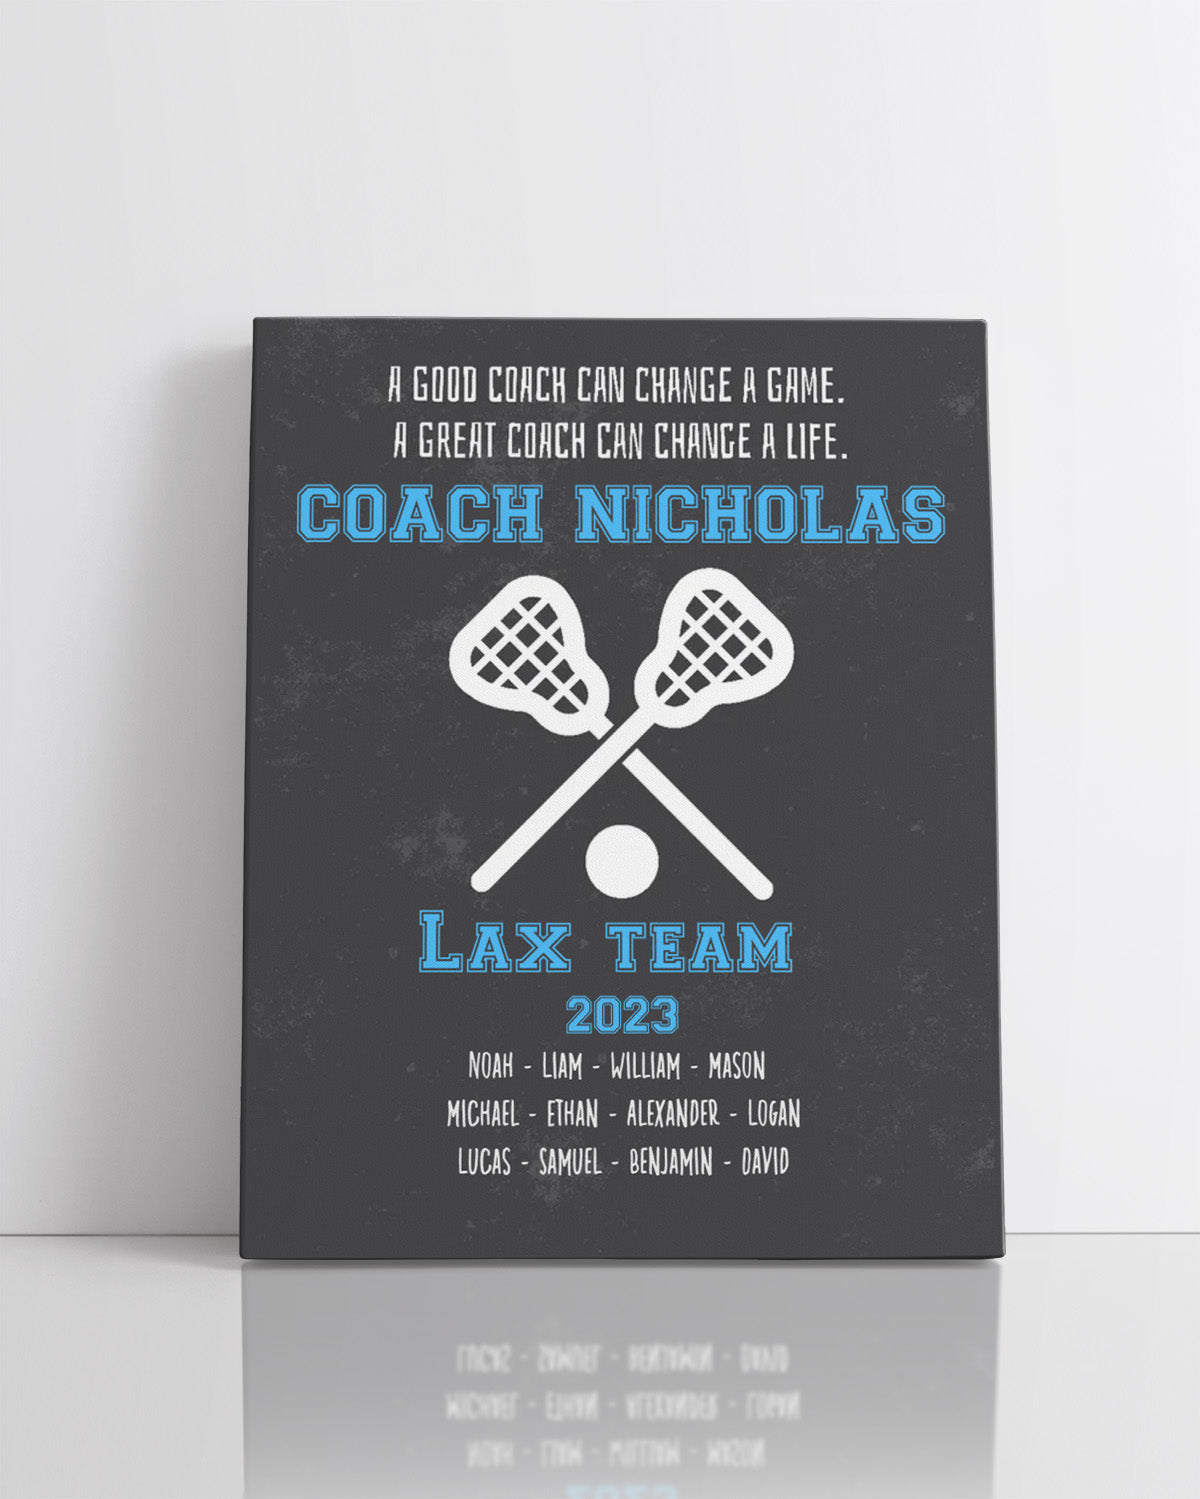 Lacrosse Coach Appreciation Gift - Customize With Athlete Names, Coach's Names, Team Name, Year or Season - Motivational Sports Wall Art - Coach's Quote